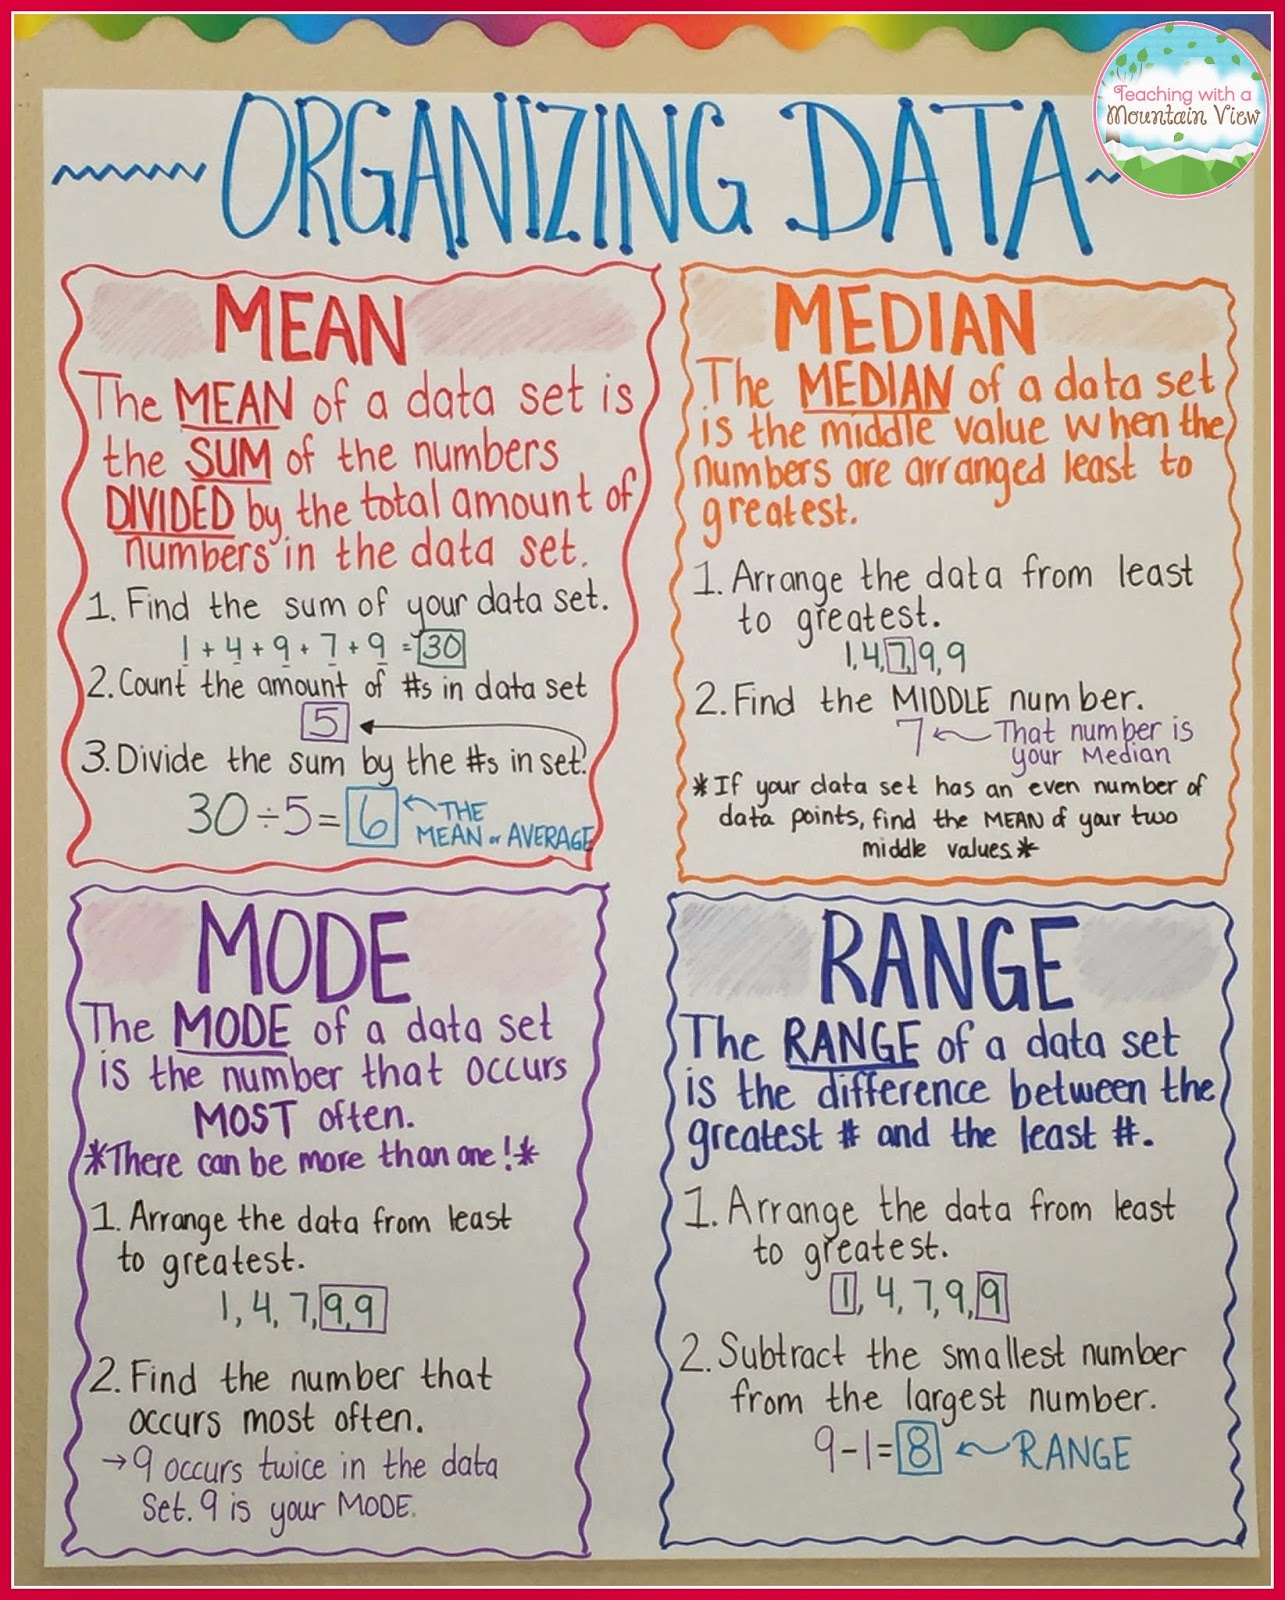 Teaching With a Mountain View: Anchor Charts